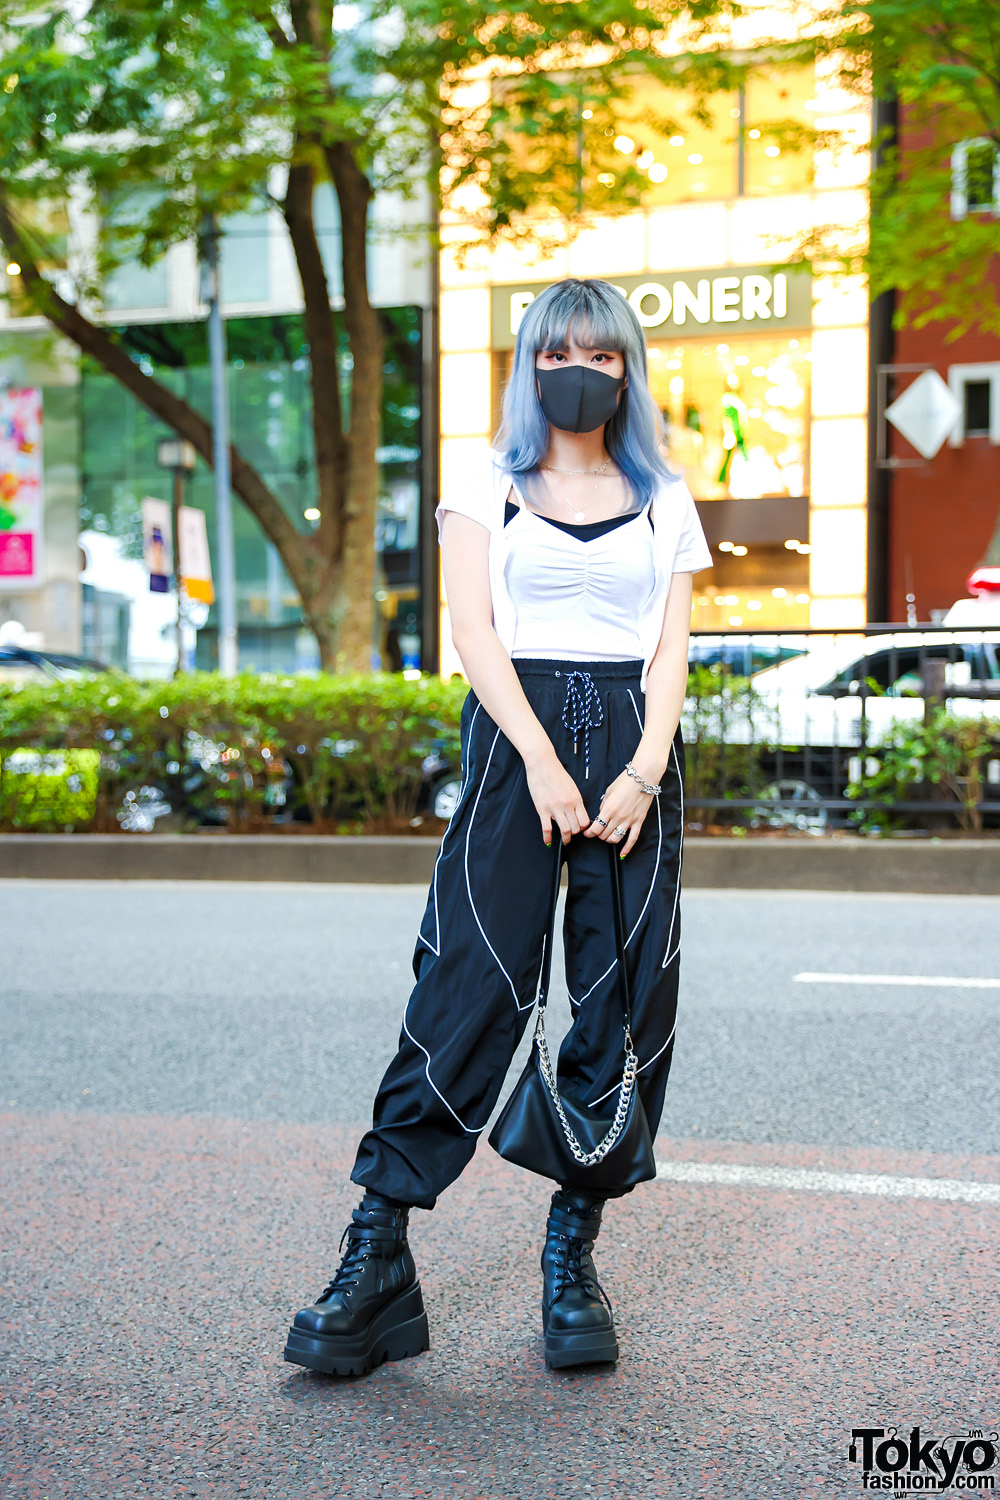 Ombre Blue Hair & Monochrome Fashion in Tokyo w/ H&M Layered Tops, Forever21 Parachute Pants, Bershka Sling Bag, Demonia Platforms & Never Mind the XU Accessories